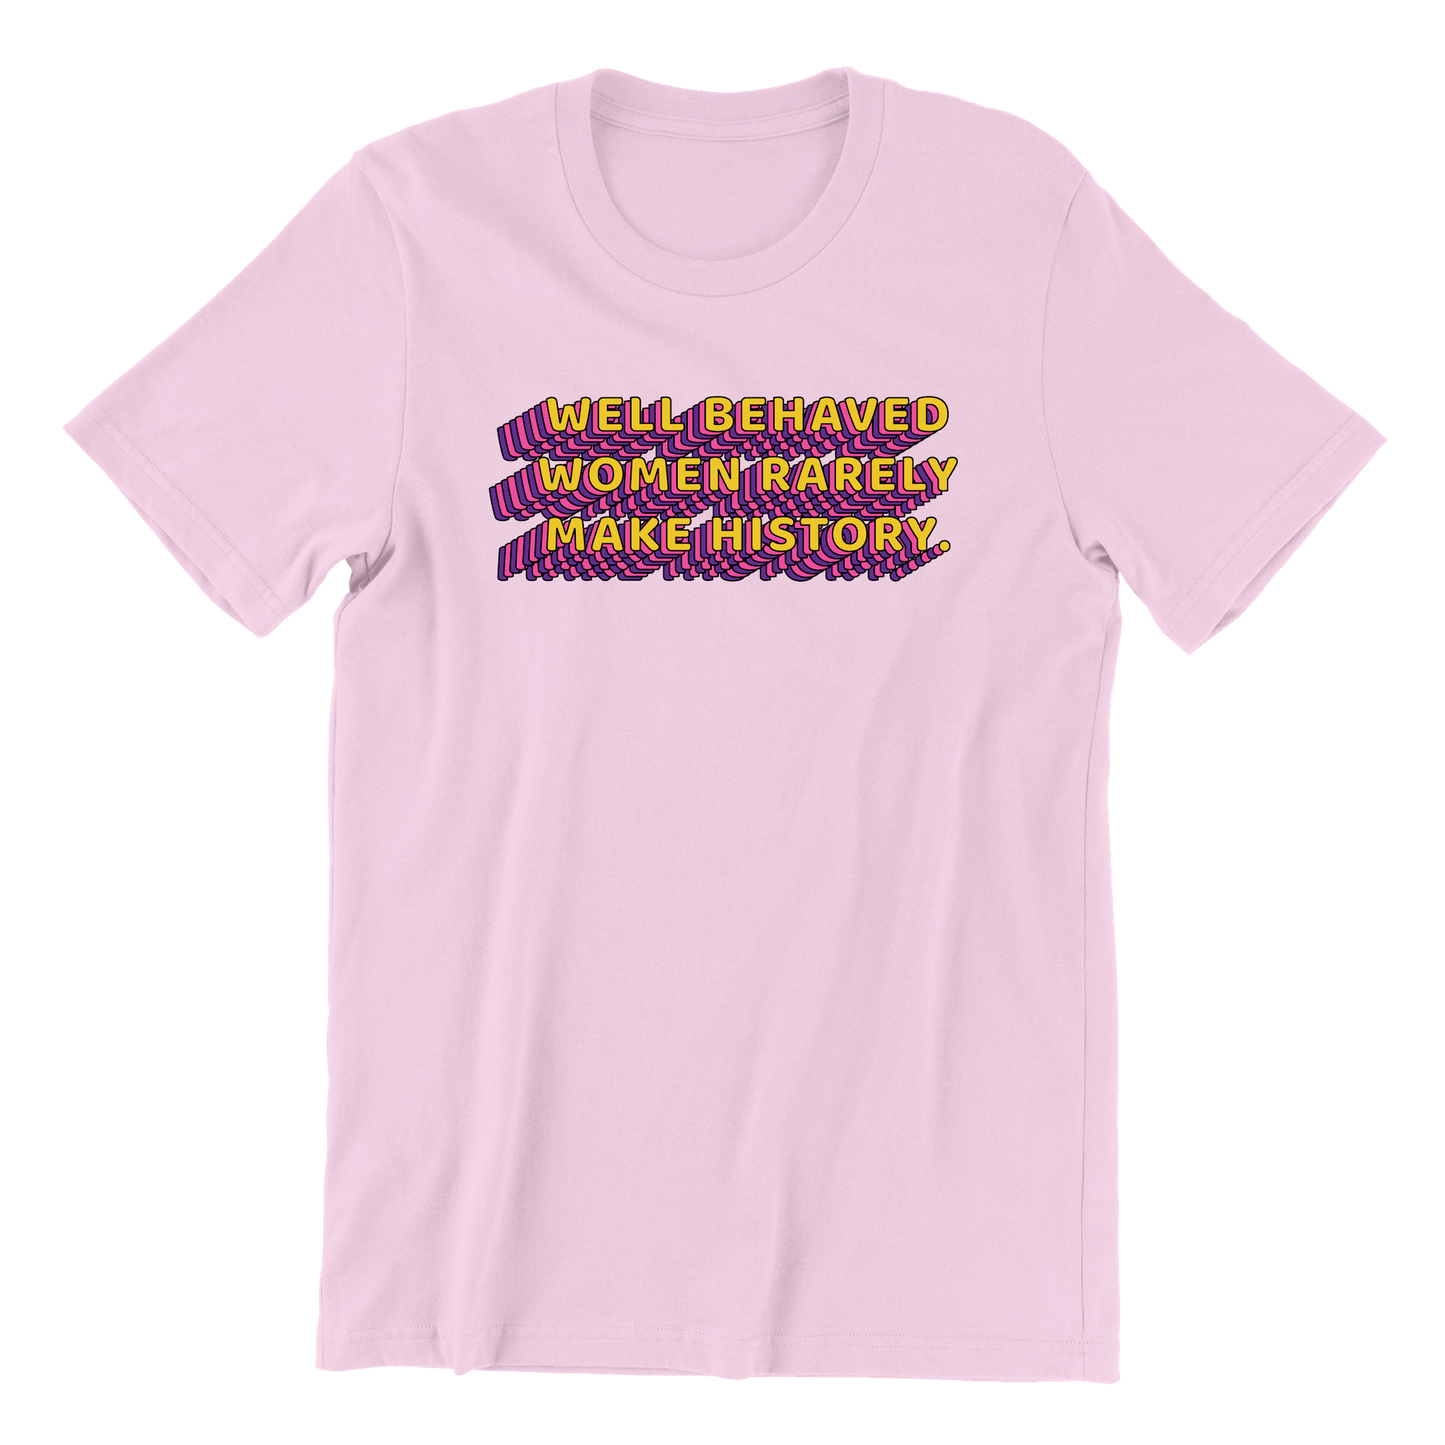 Well Behaved Women Rarely Make History Tee (Light Pink)